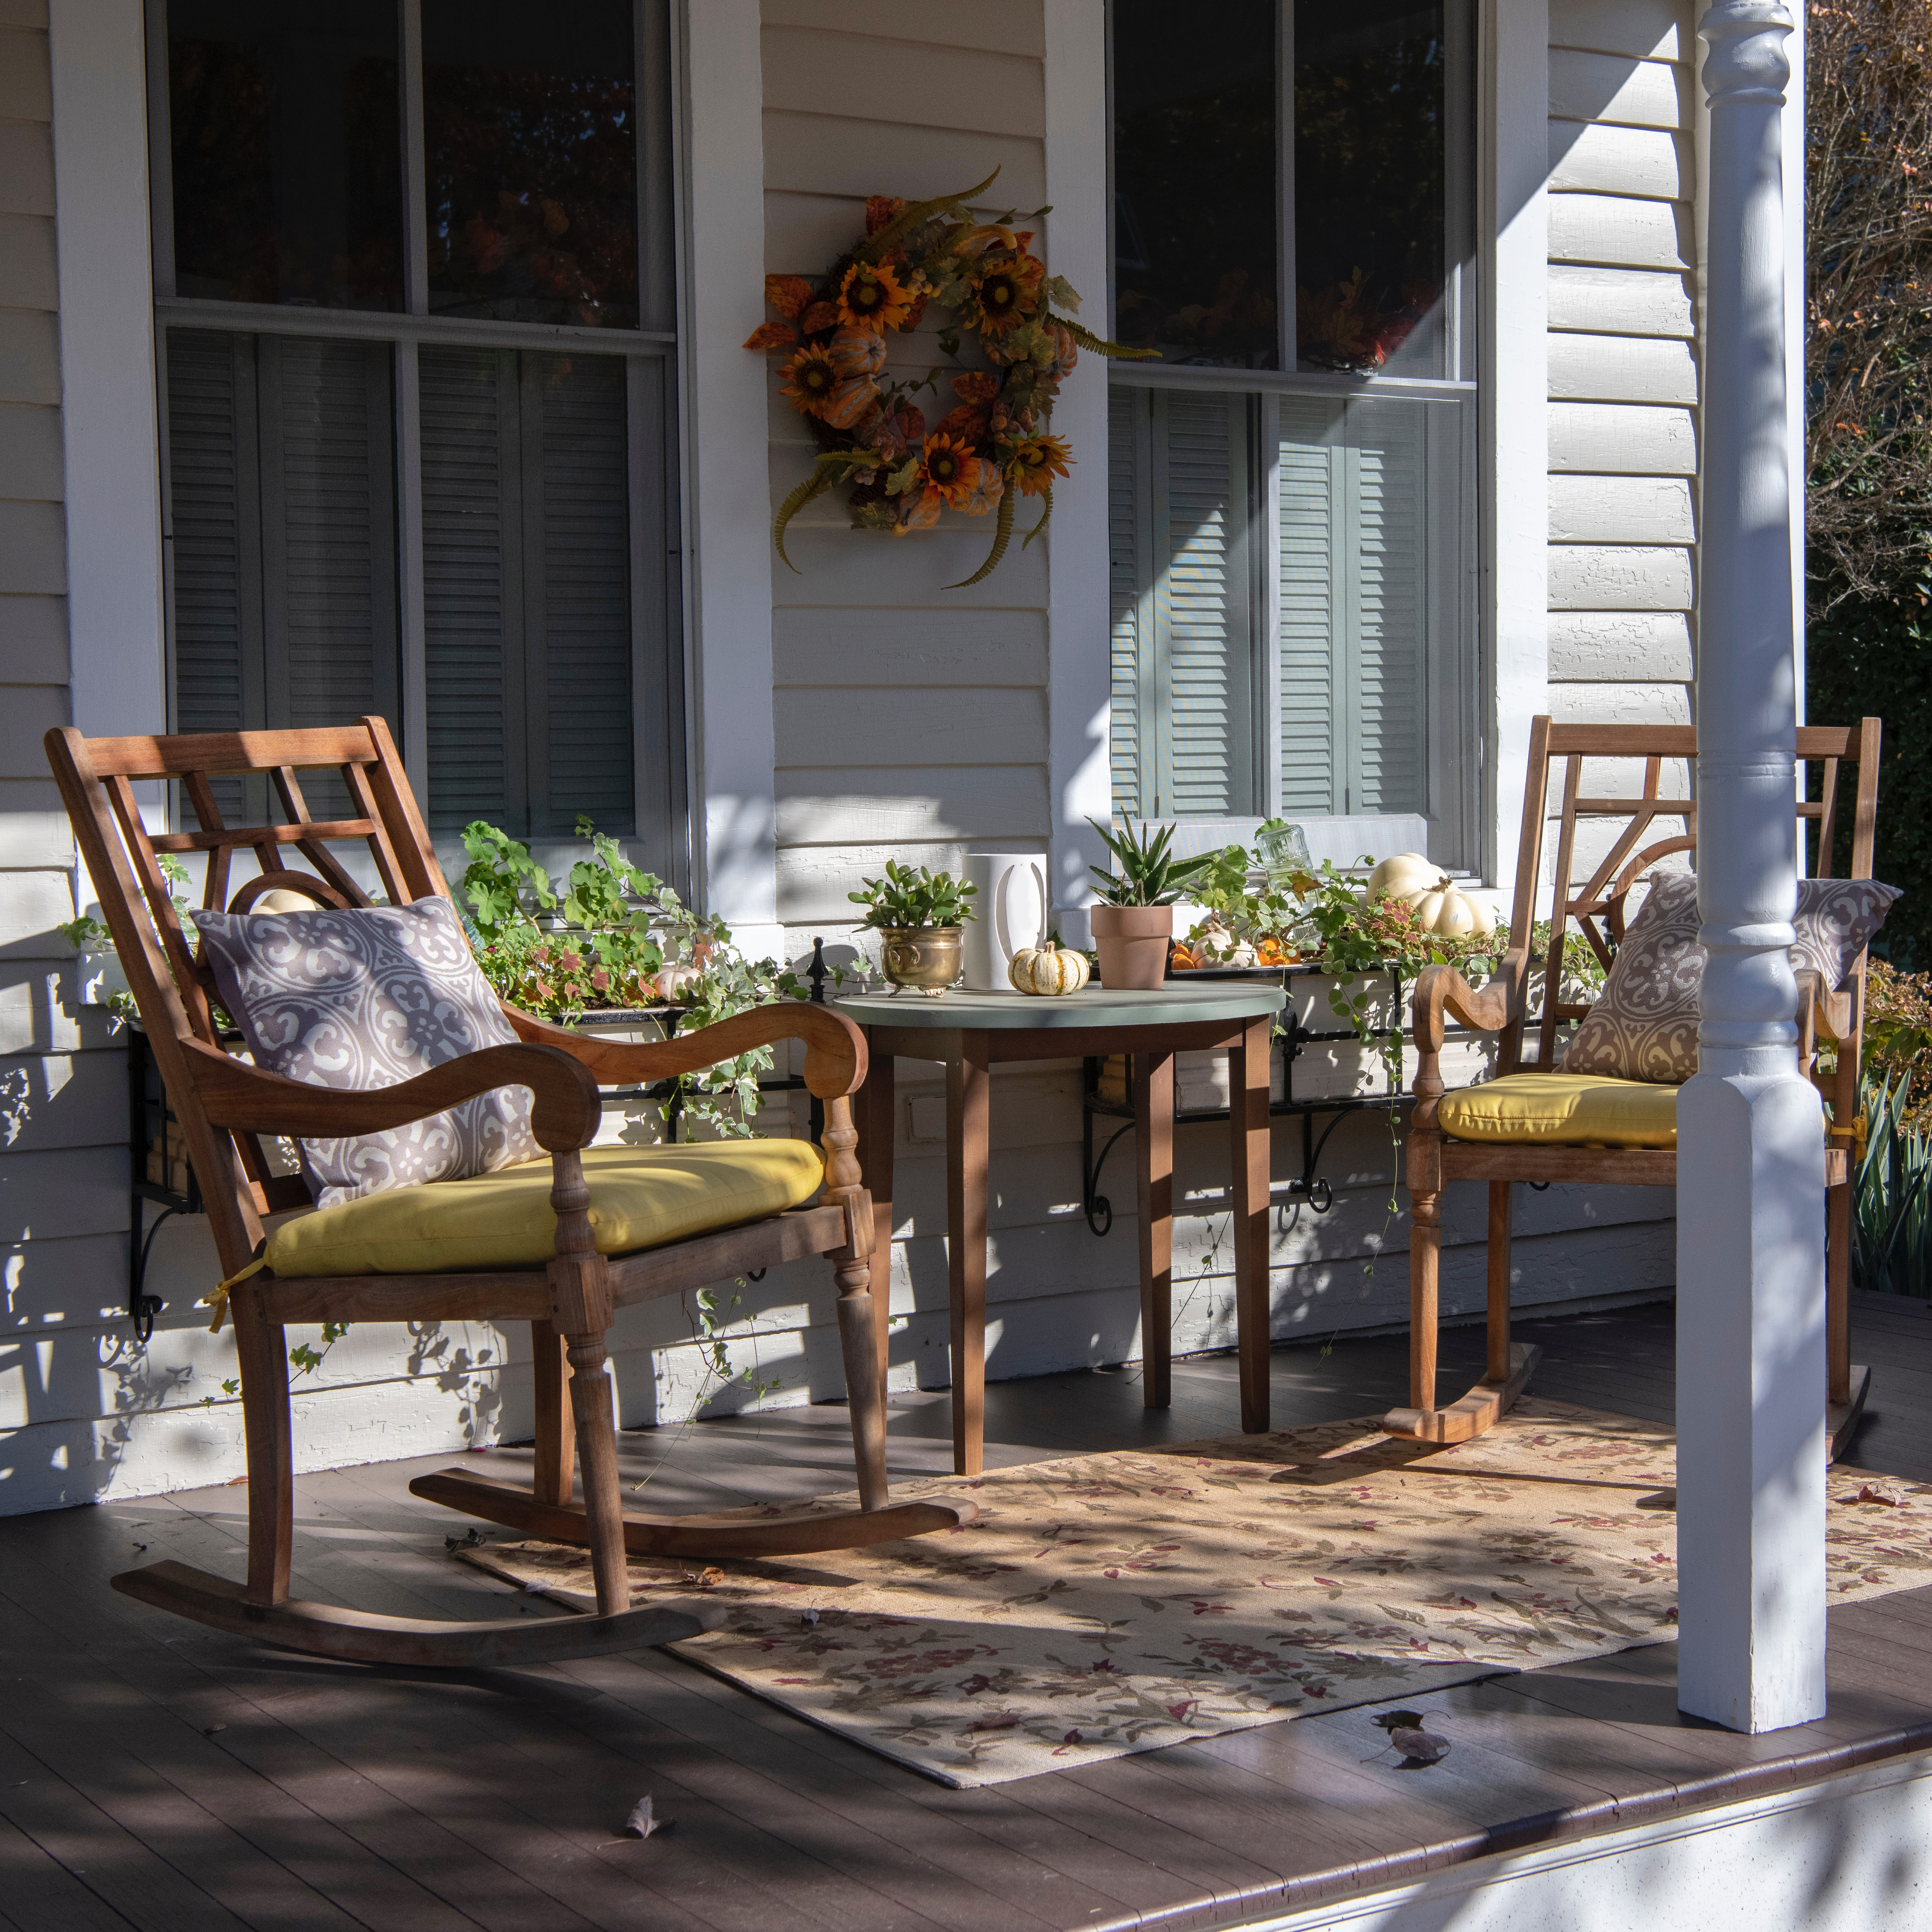 pretty porch with rocking chairs and small table